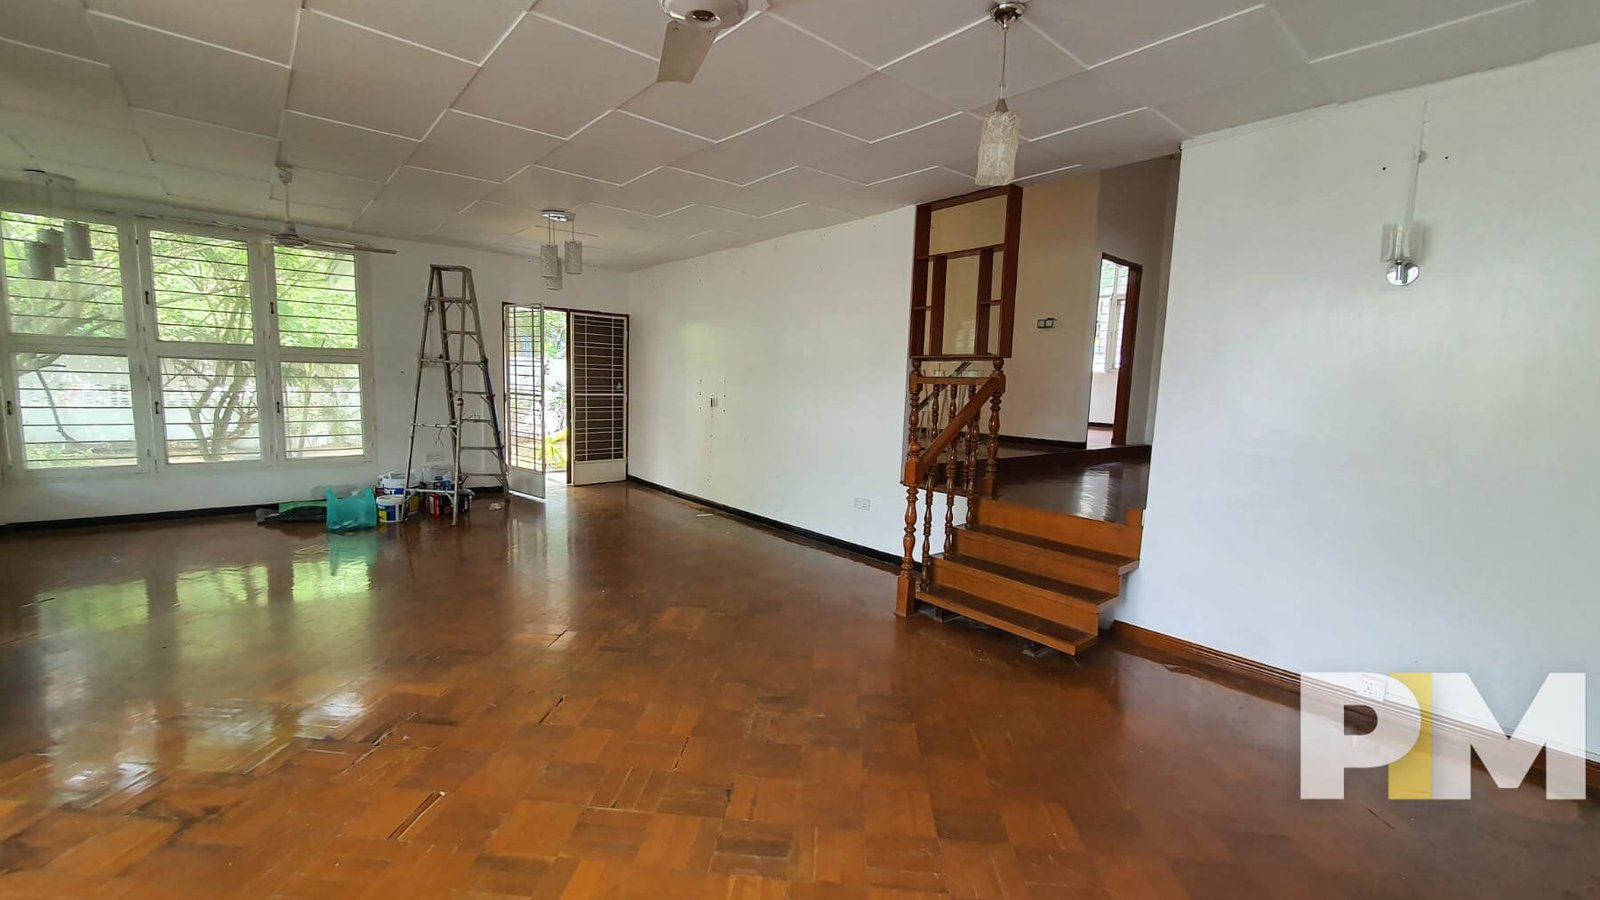 downstair landing with air conditioner - property in Yangon